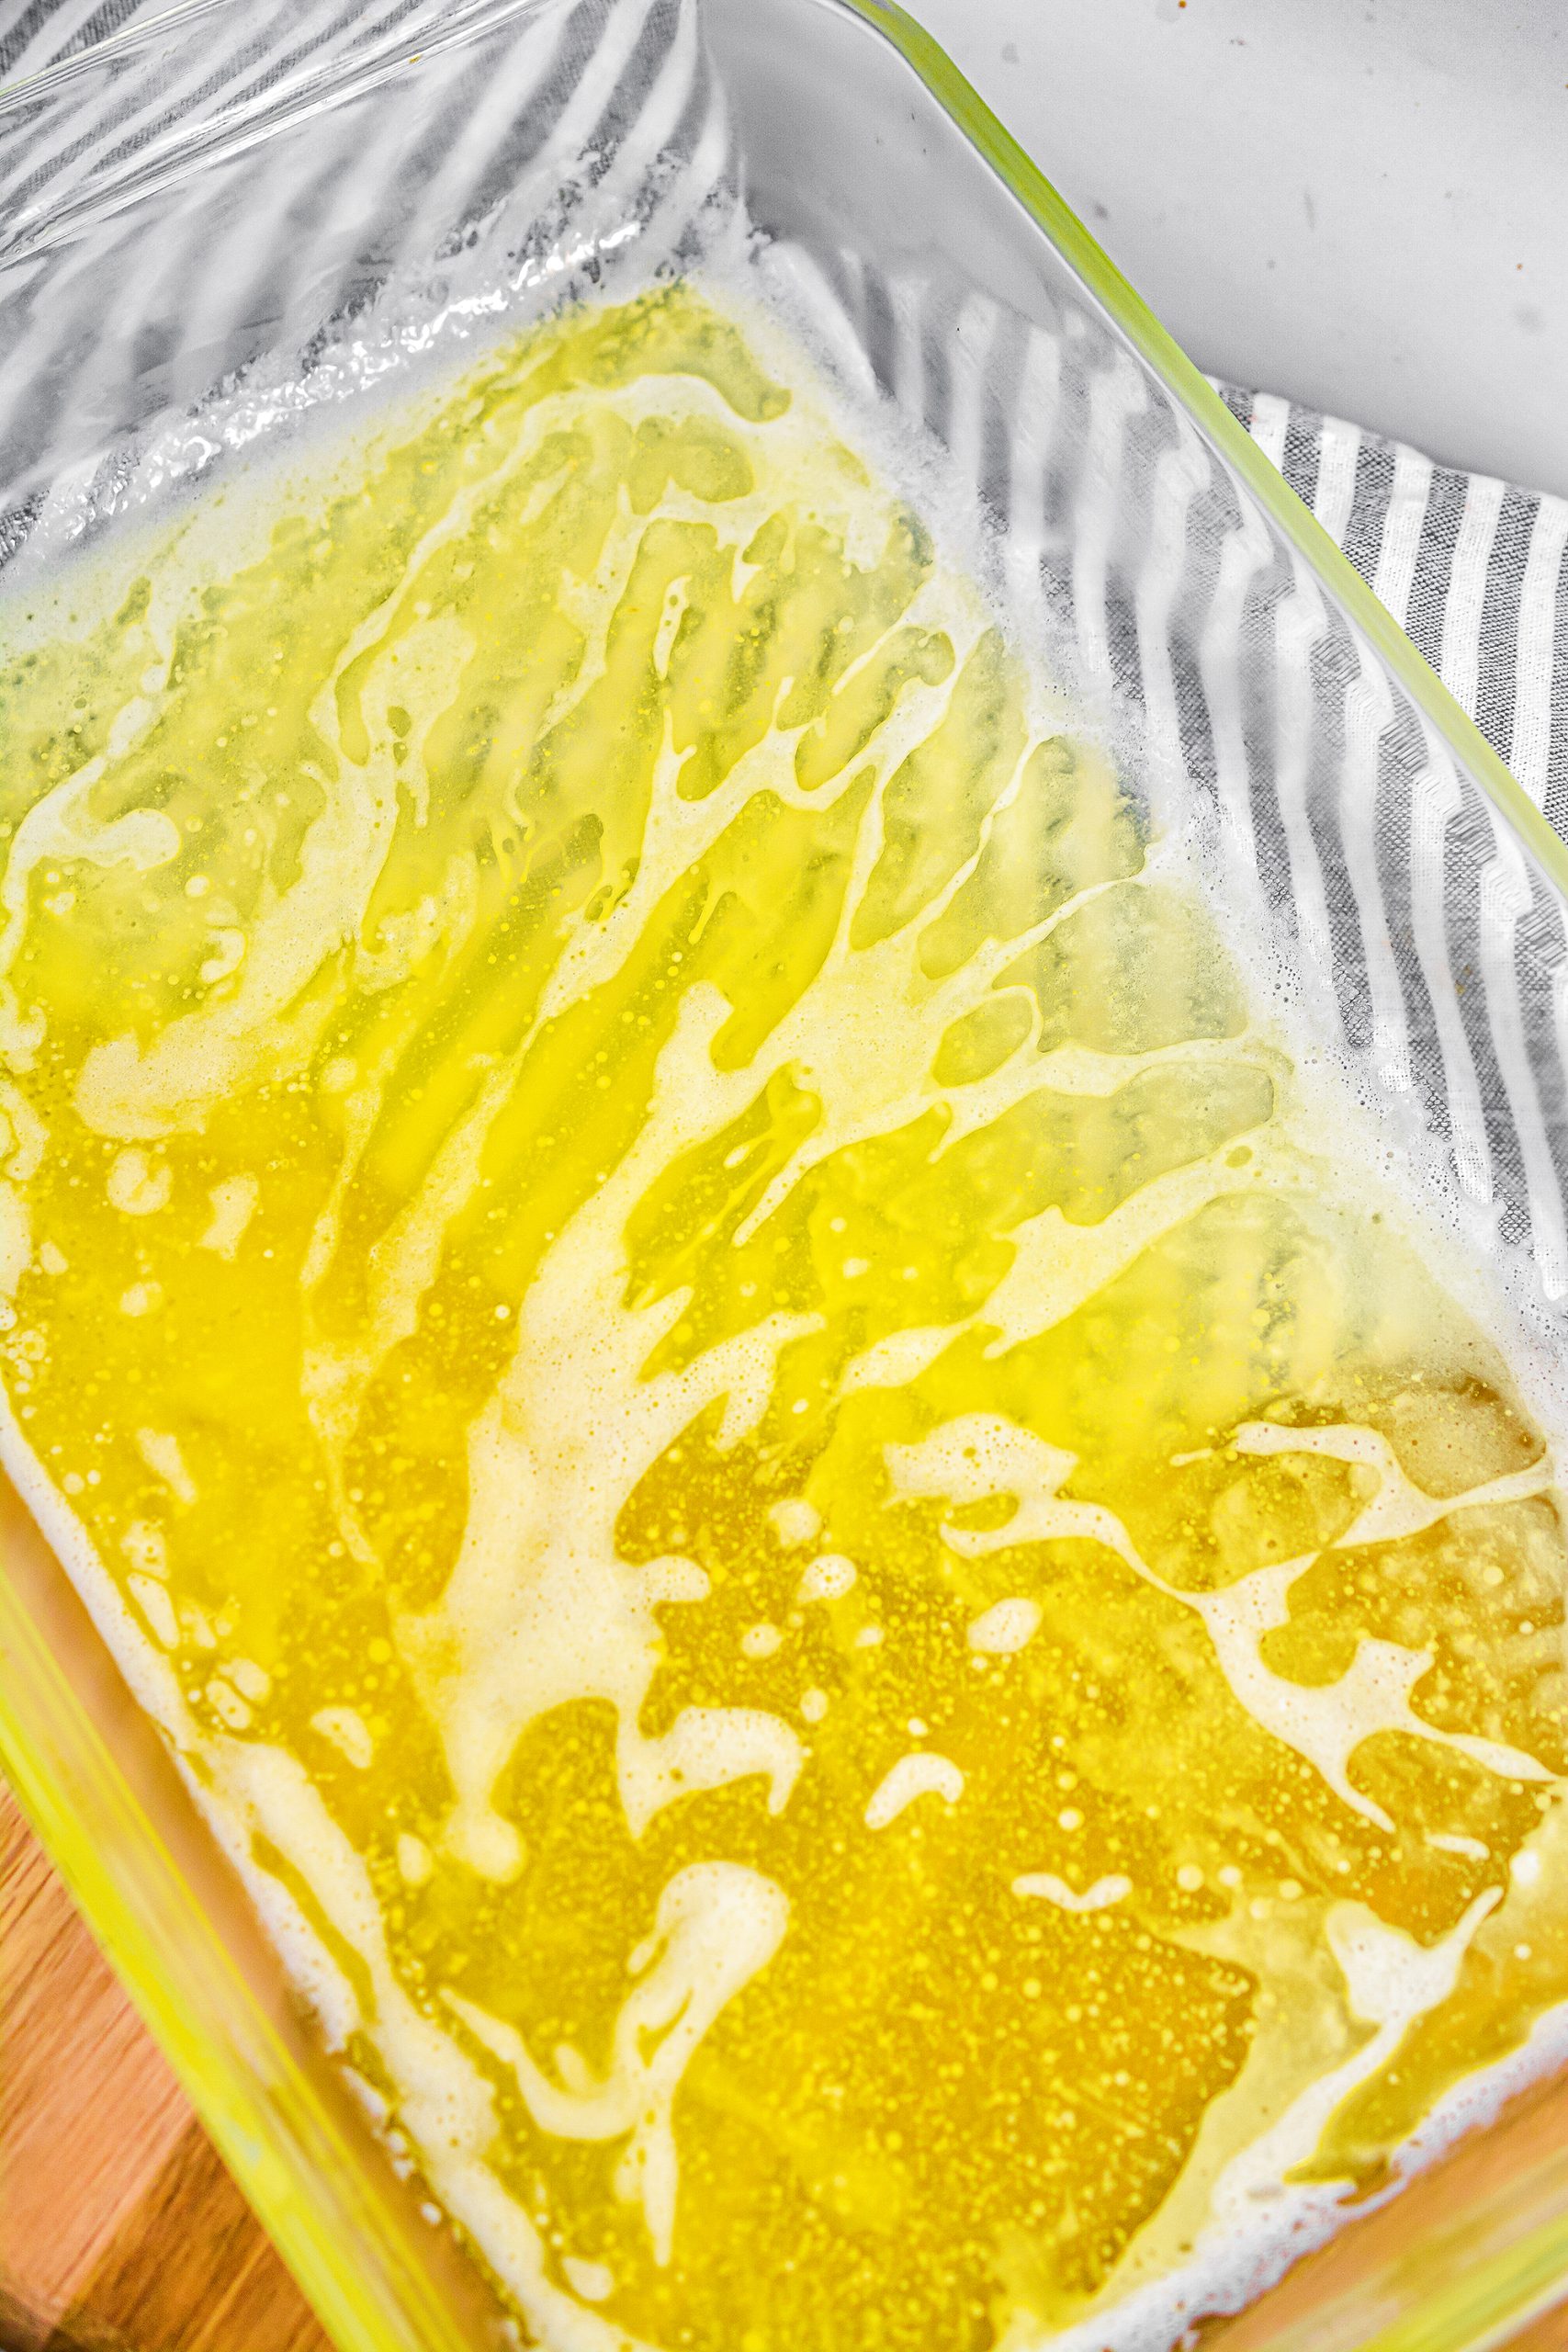 Add the melted butter to a 9x13 baking dish. 